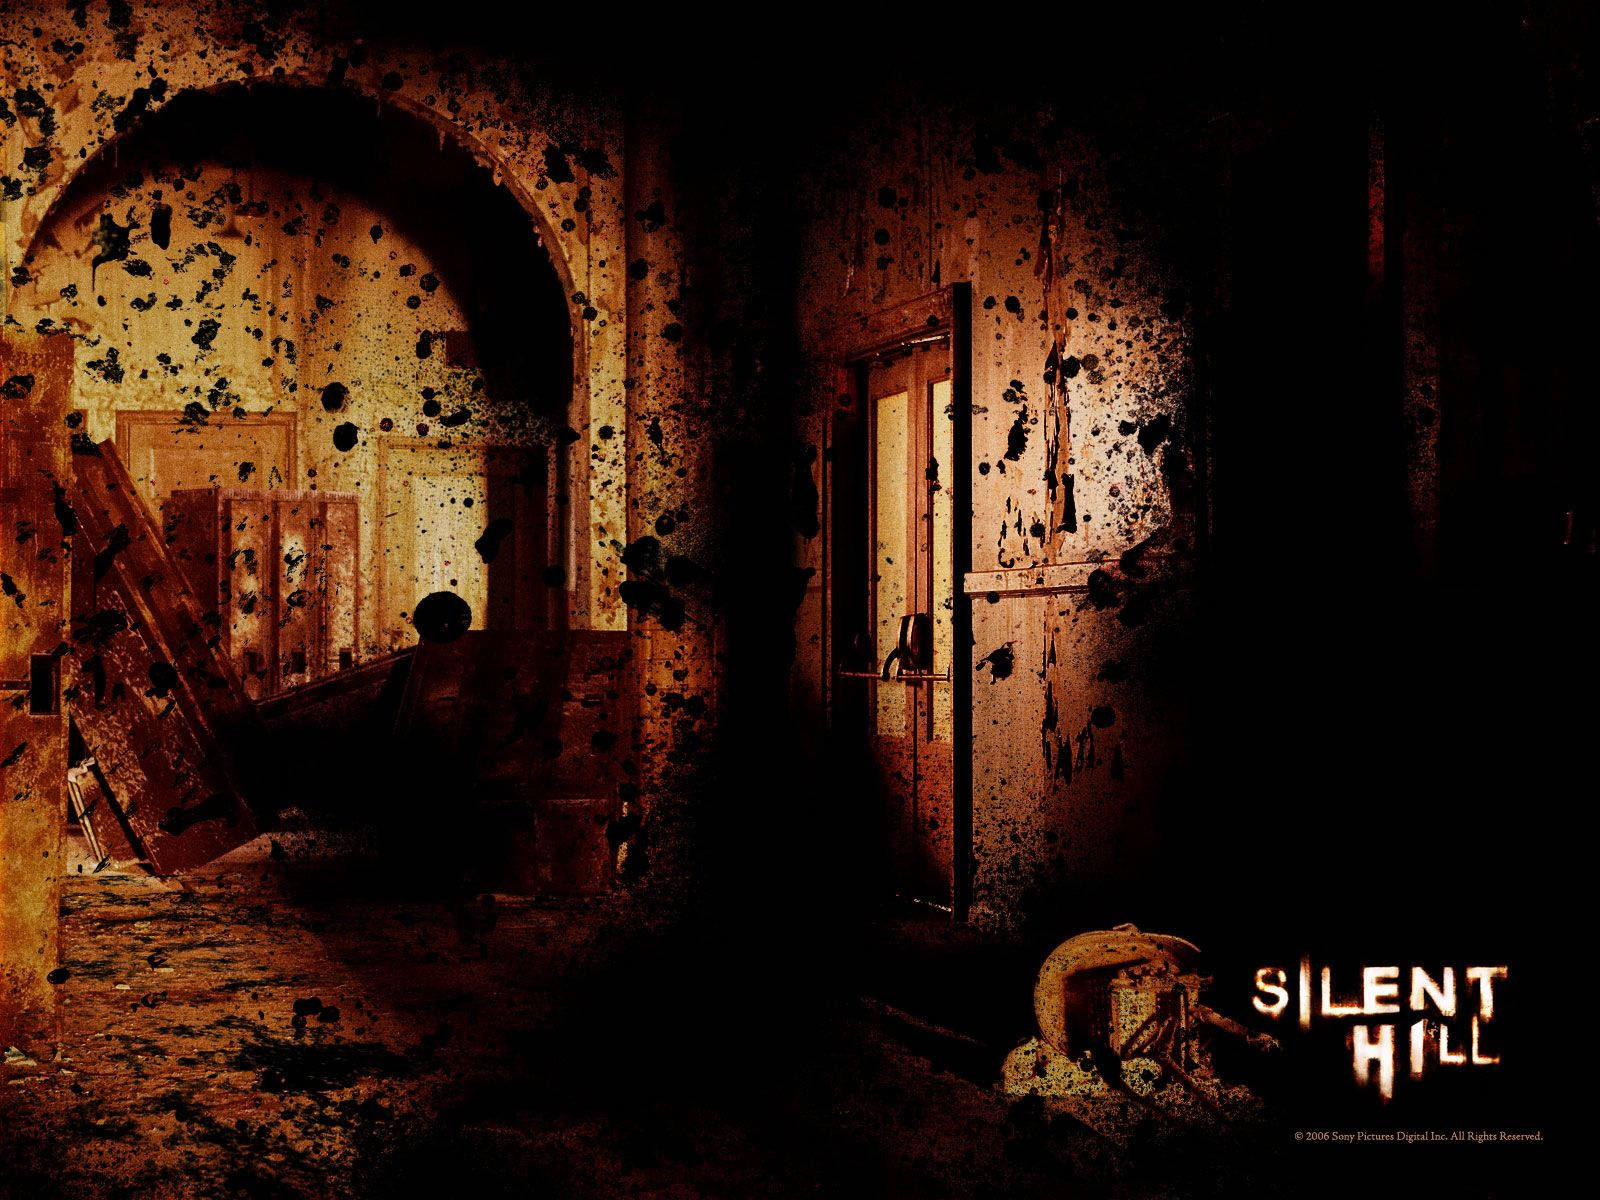 Scary Silent Hill Building Wallpaper